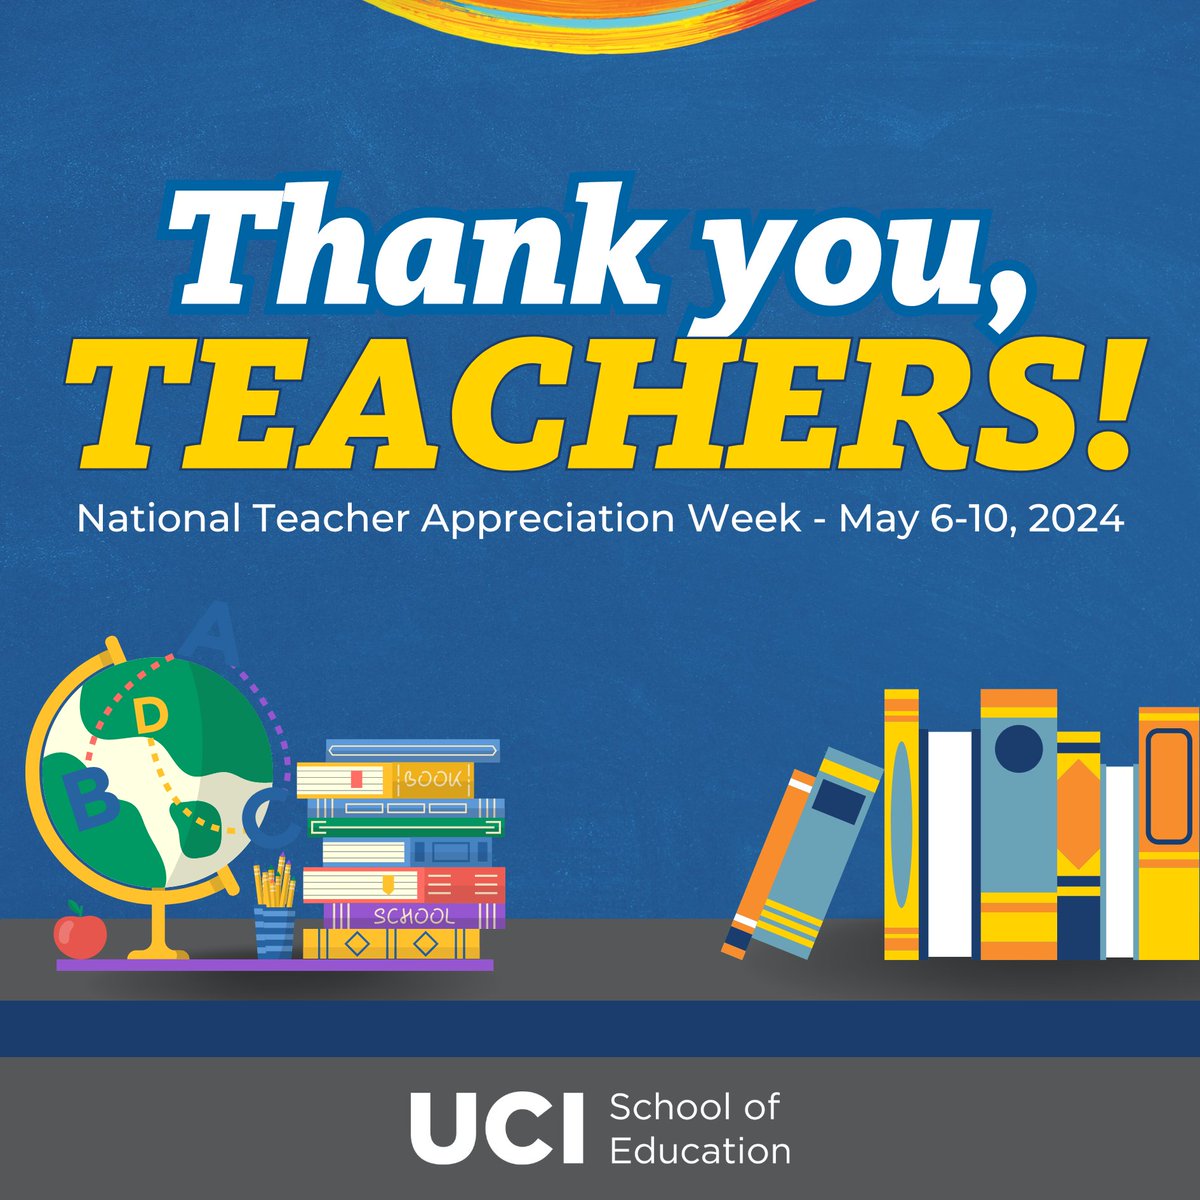 Today and everyday, #UCIEducation celebrates all teachers who make a positive impact on the lives of their students and communities. Happy #TeacherAppreciationWeek!